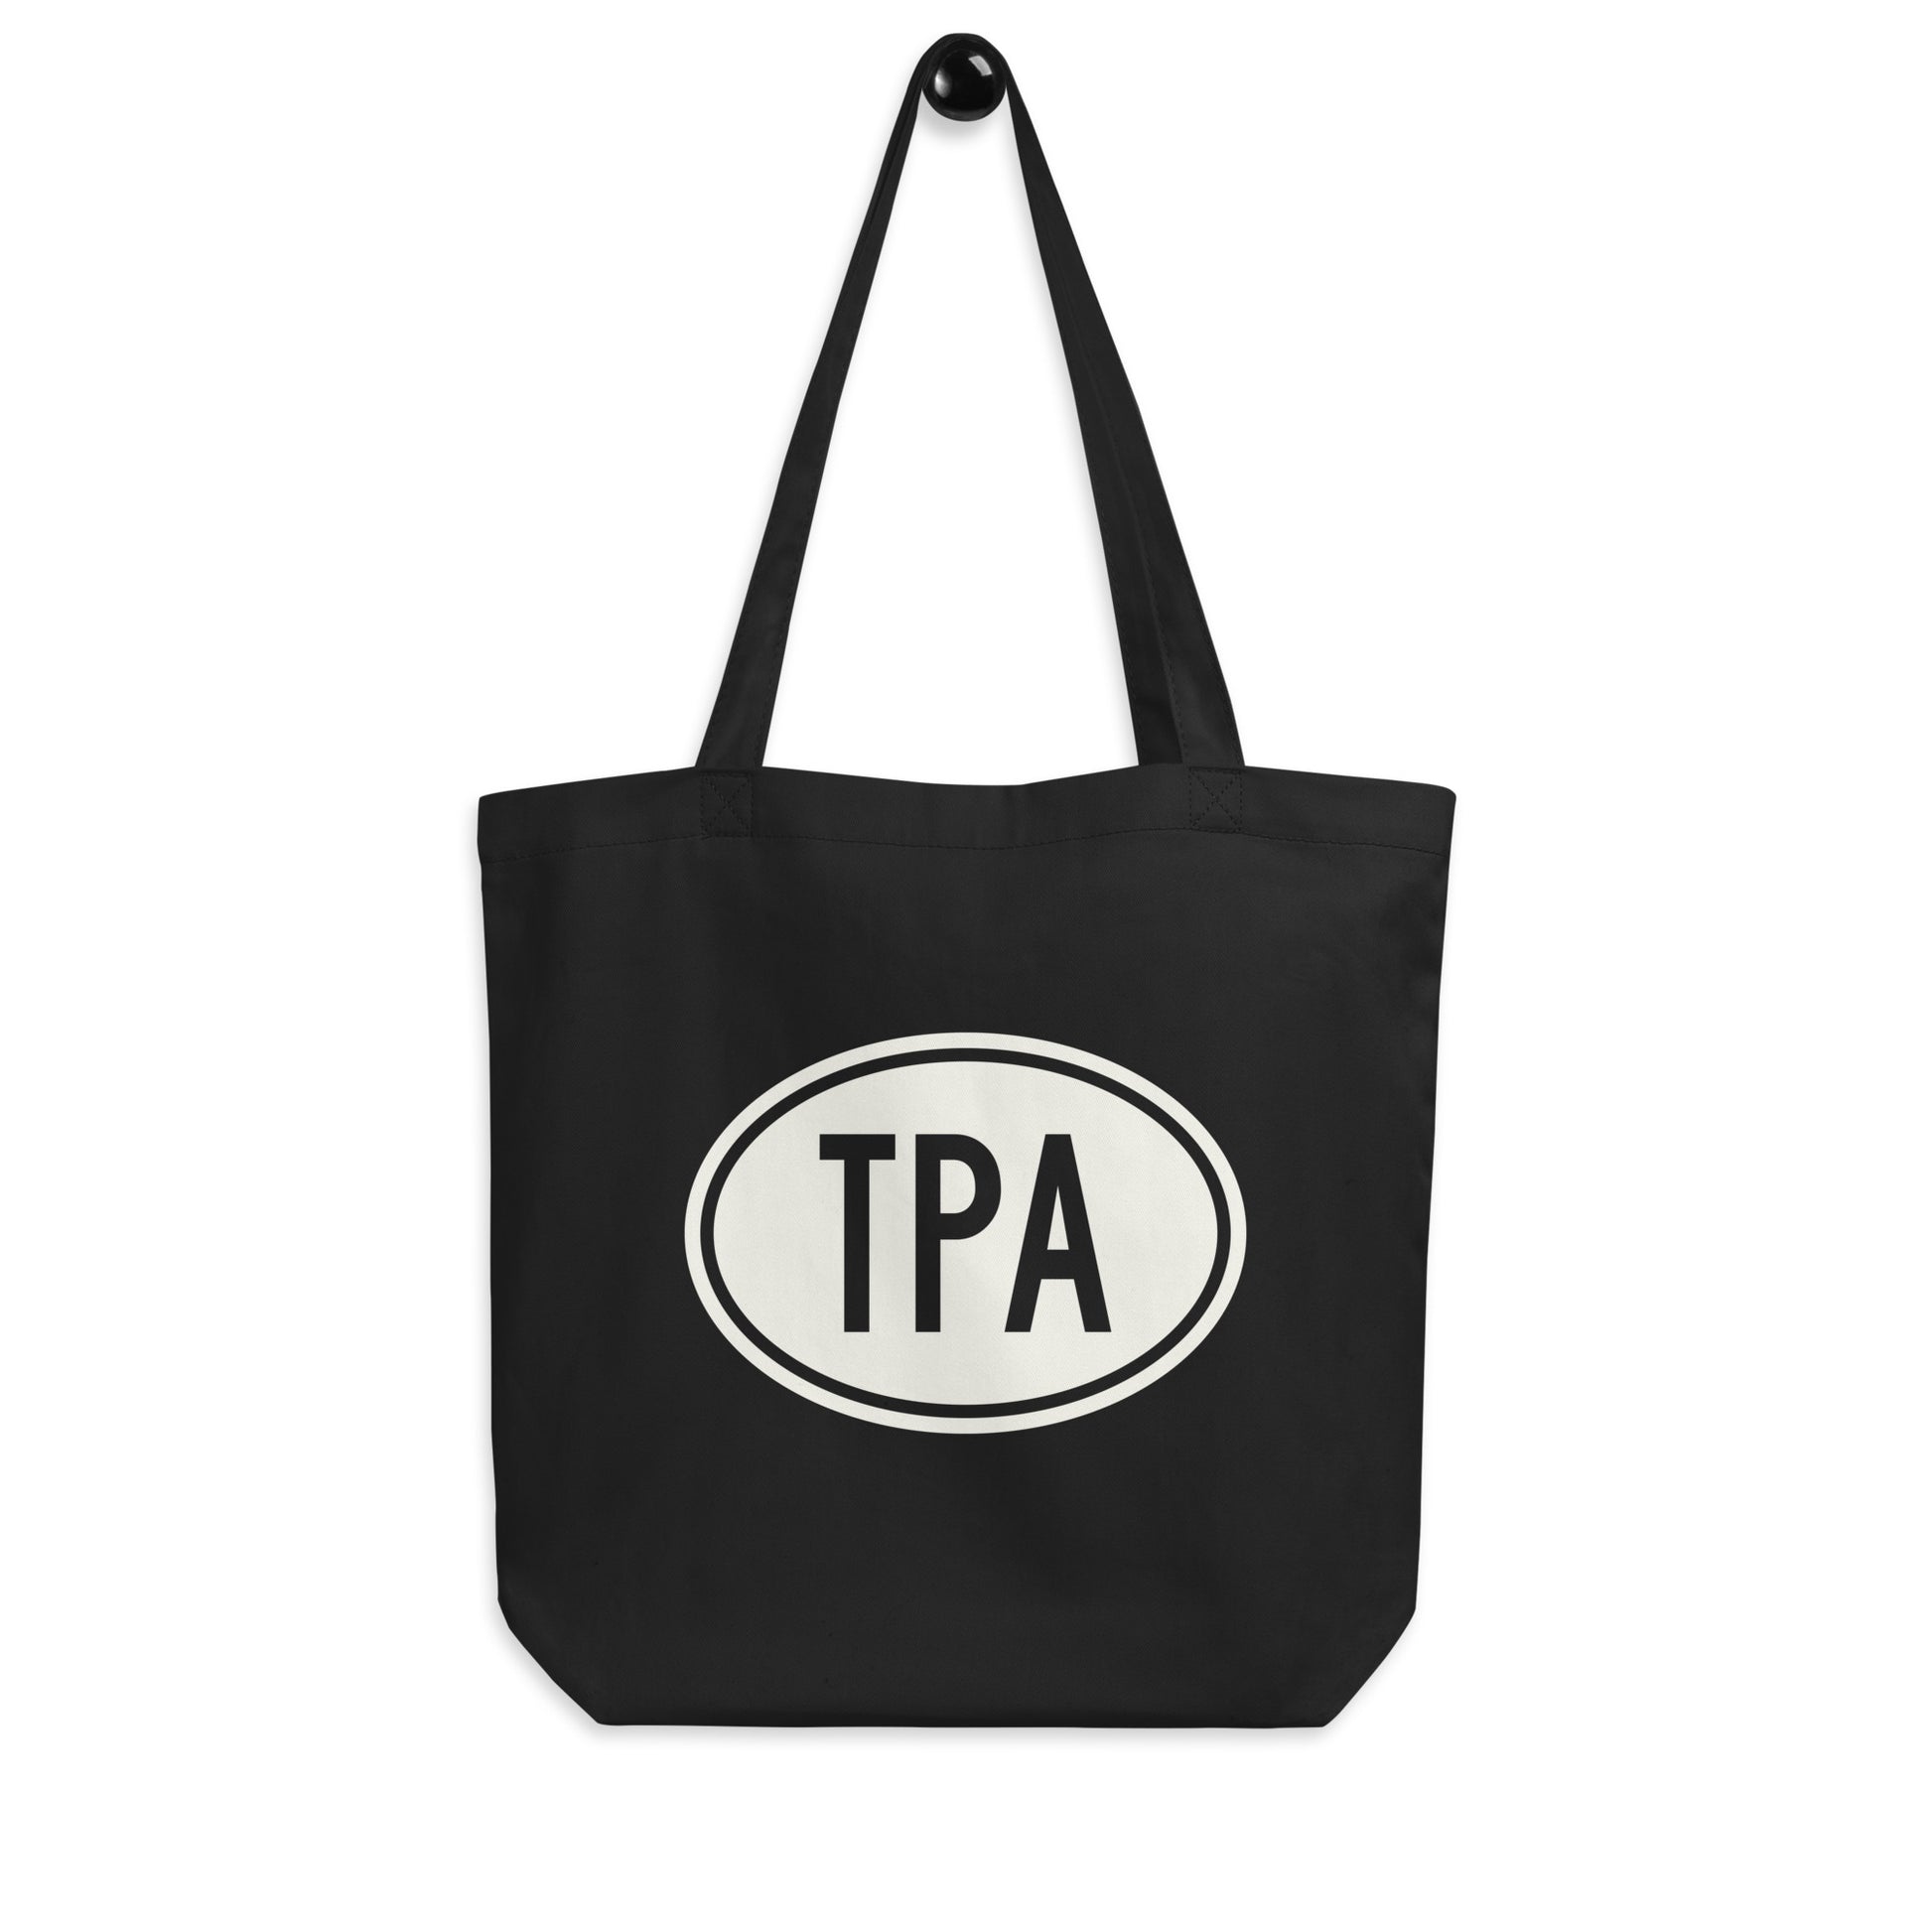 Unique Travel Gift Organic Tote - White Oval • TPA Tampa • YHM Designs - Image 04